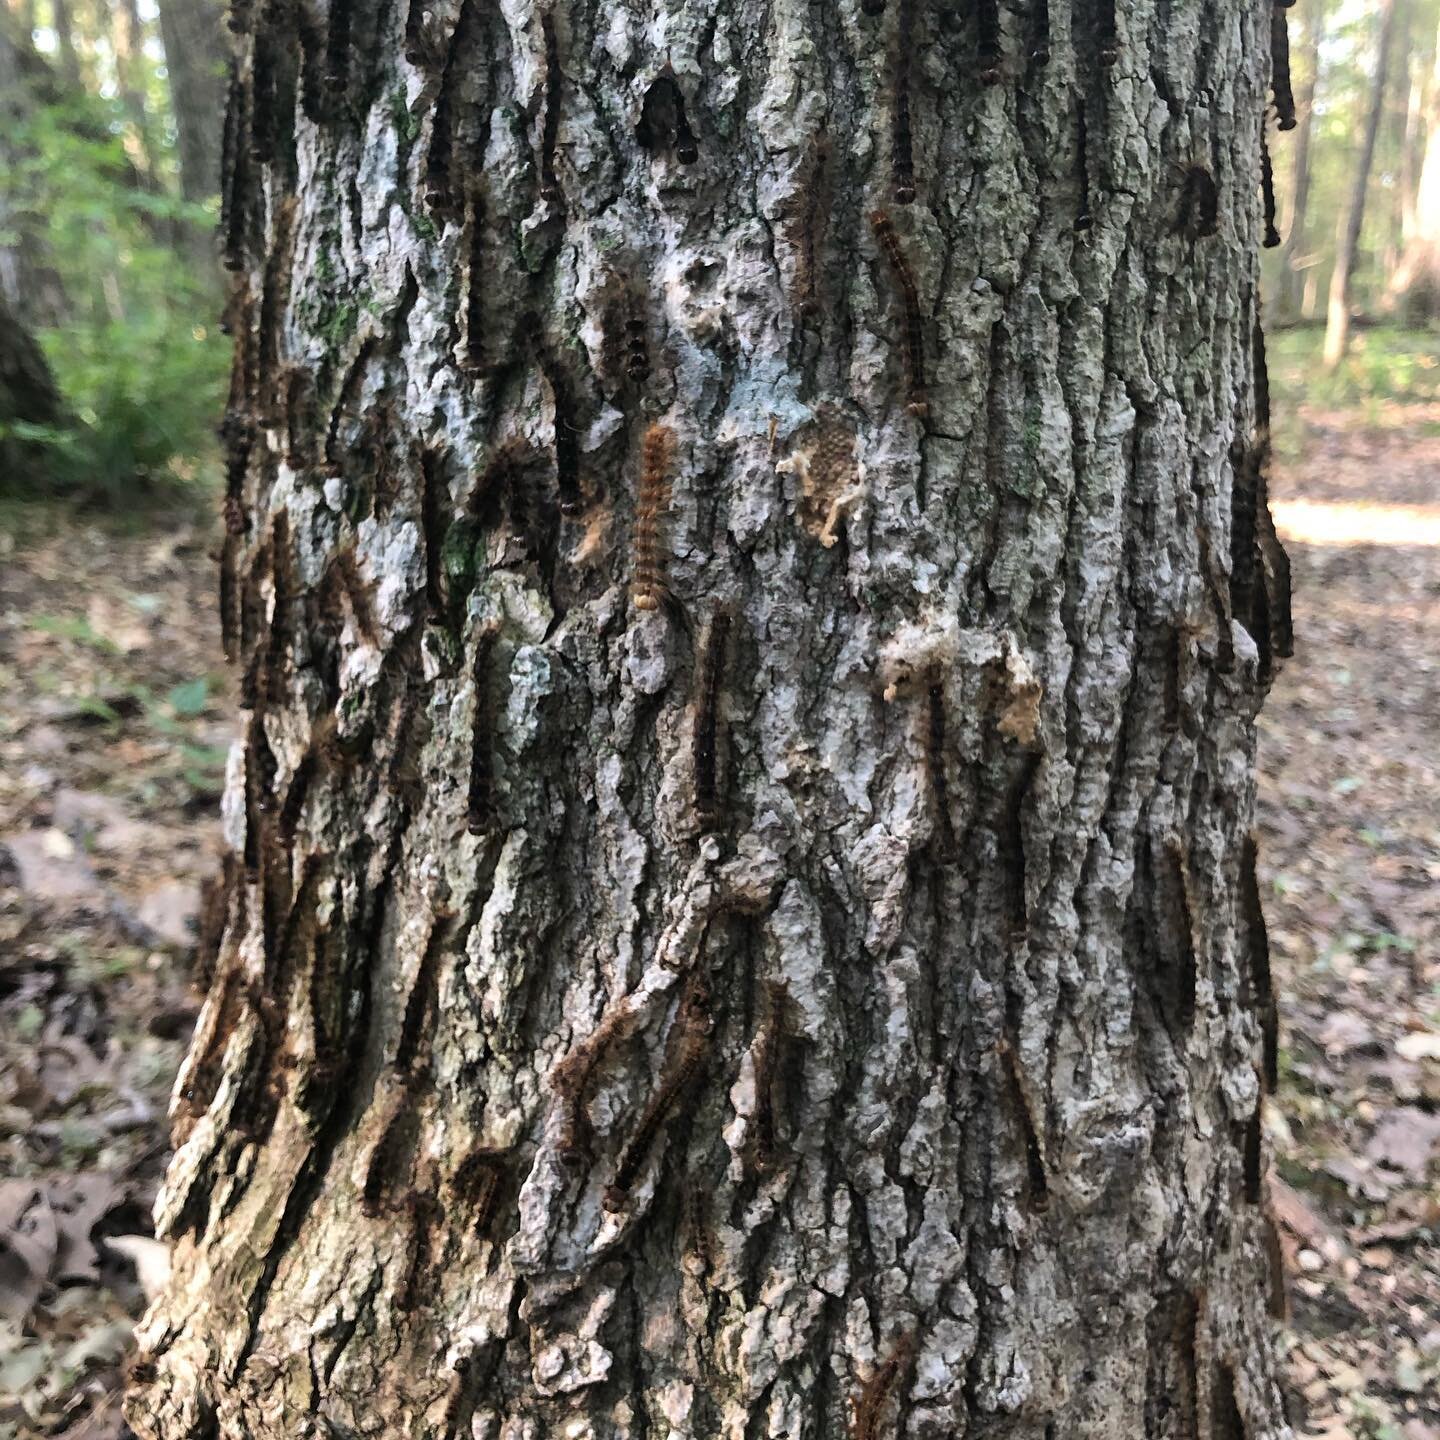 Gypsy moth caterpillars climbing a tree for another day of feeding

After this year, I&rsquo;m sure the majority of people in Ontario are now familiar with the gypsy moth, and the unchecked havoc they wreak on forests. 

The more places I visit, the 